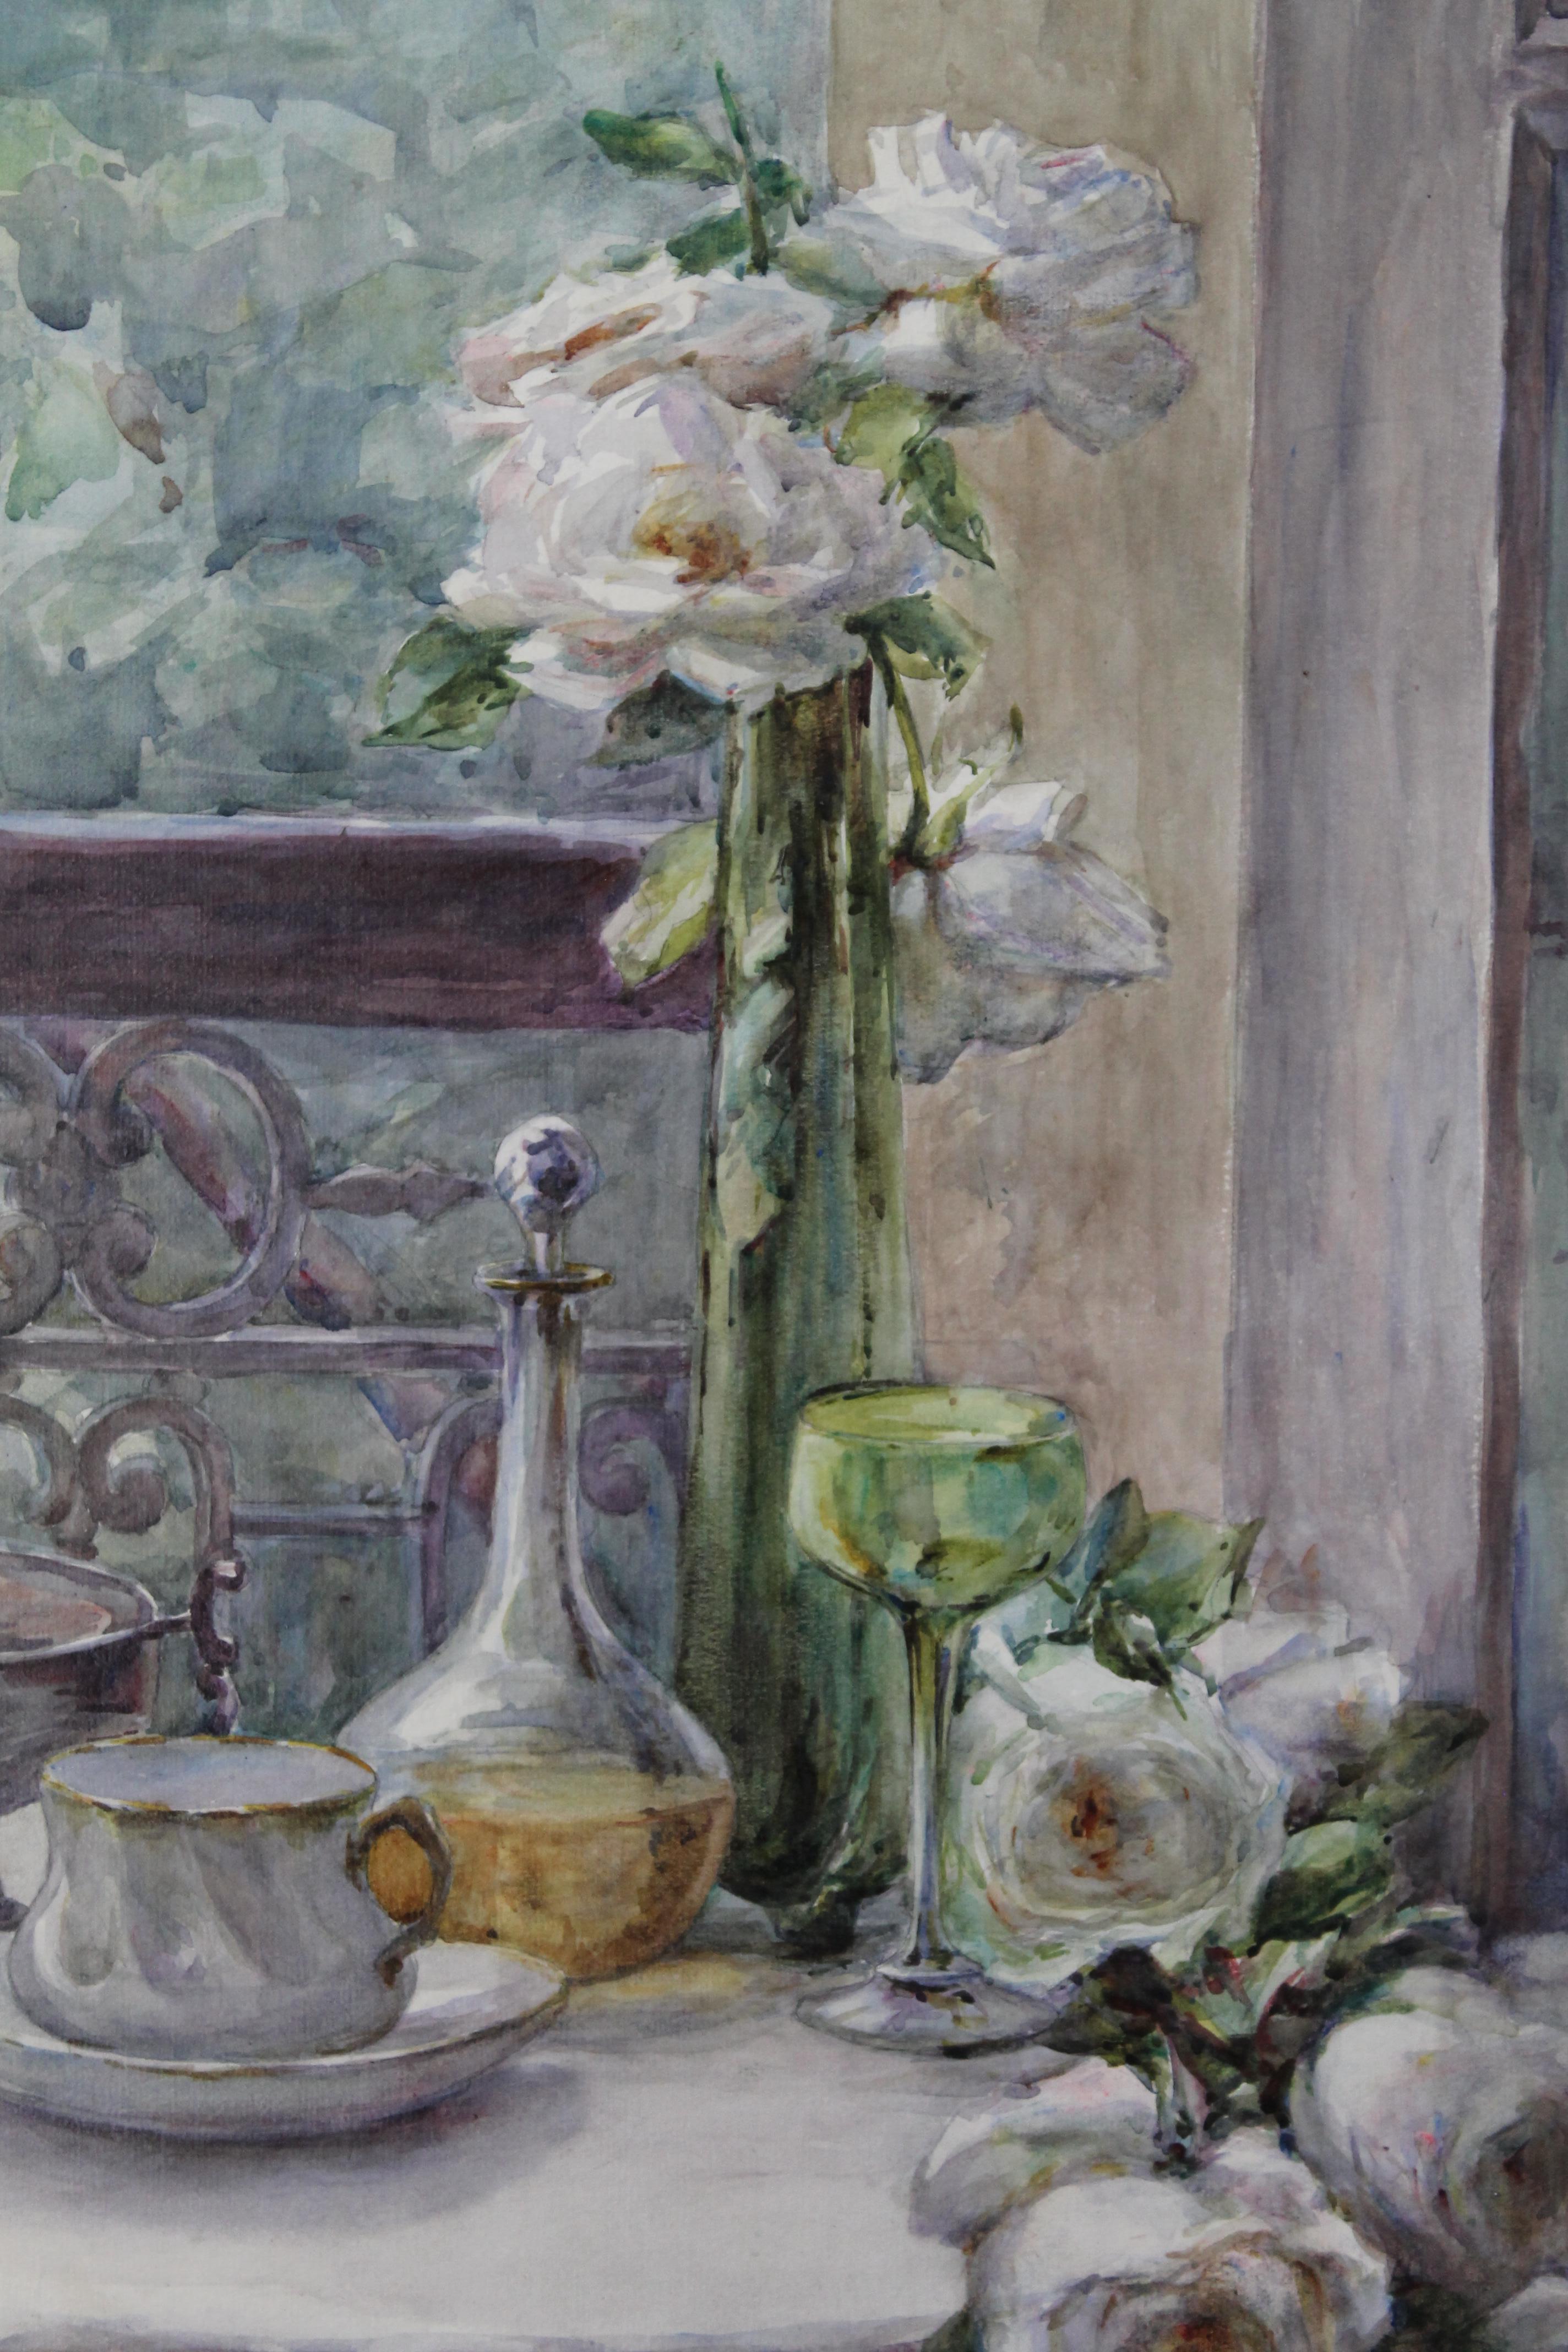 Large early 20th century watercolour/gouache painting on thick paper on wood board. This is an amazingly atmospheric painting.  The palette is primarily white, green and blue/purple.  A table is set on a railed garden terrace.  White roses, freshly